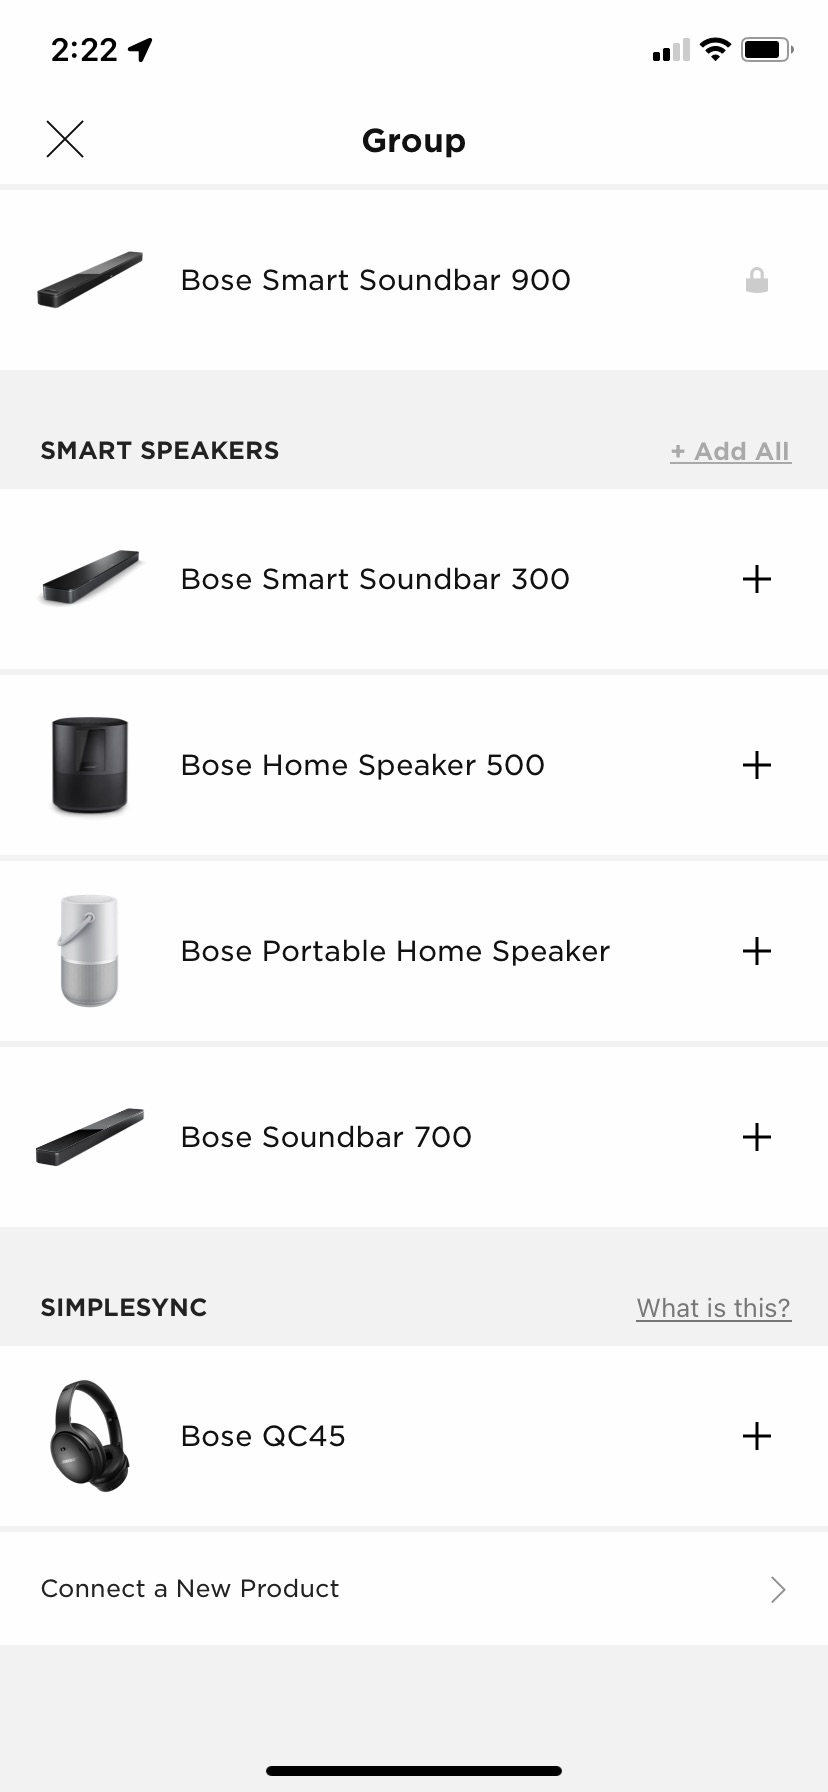 Bose Smart Soundbar 900 with Dolby Atmos - Home Theater System, Black